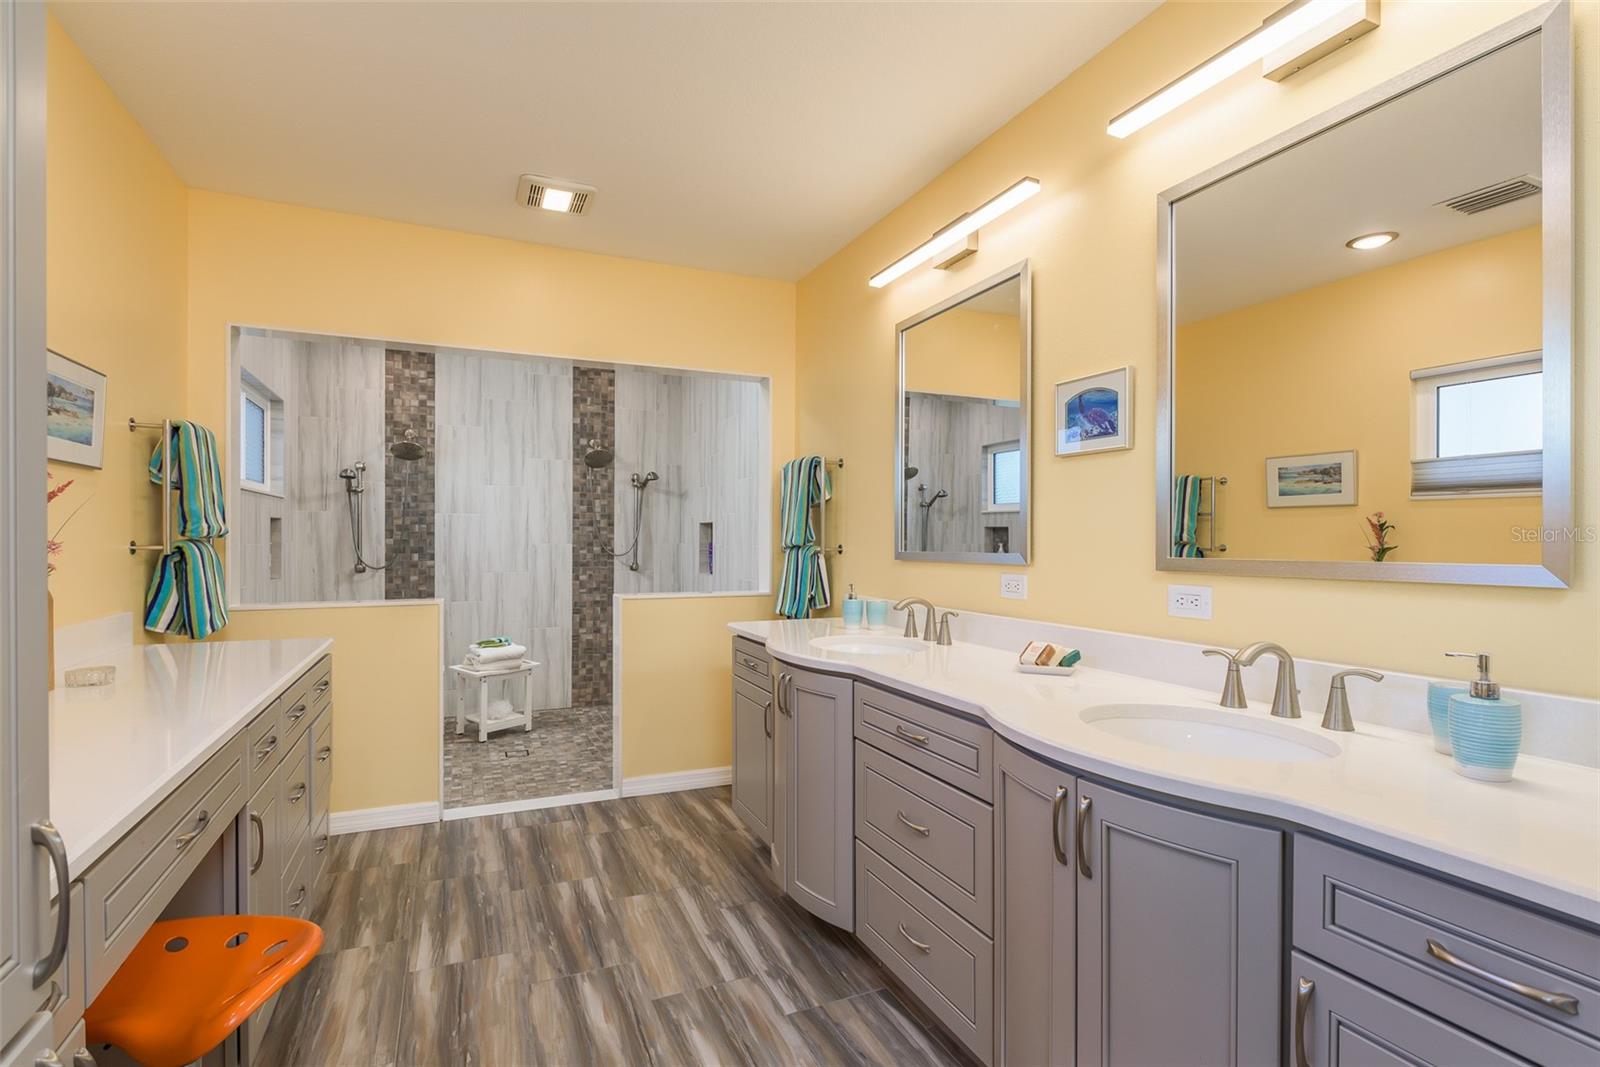 Primary Bath features double sinks, make-up counter, and spacious all-tile shower with double shower heads